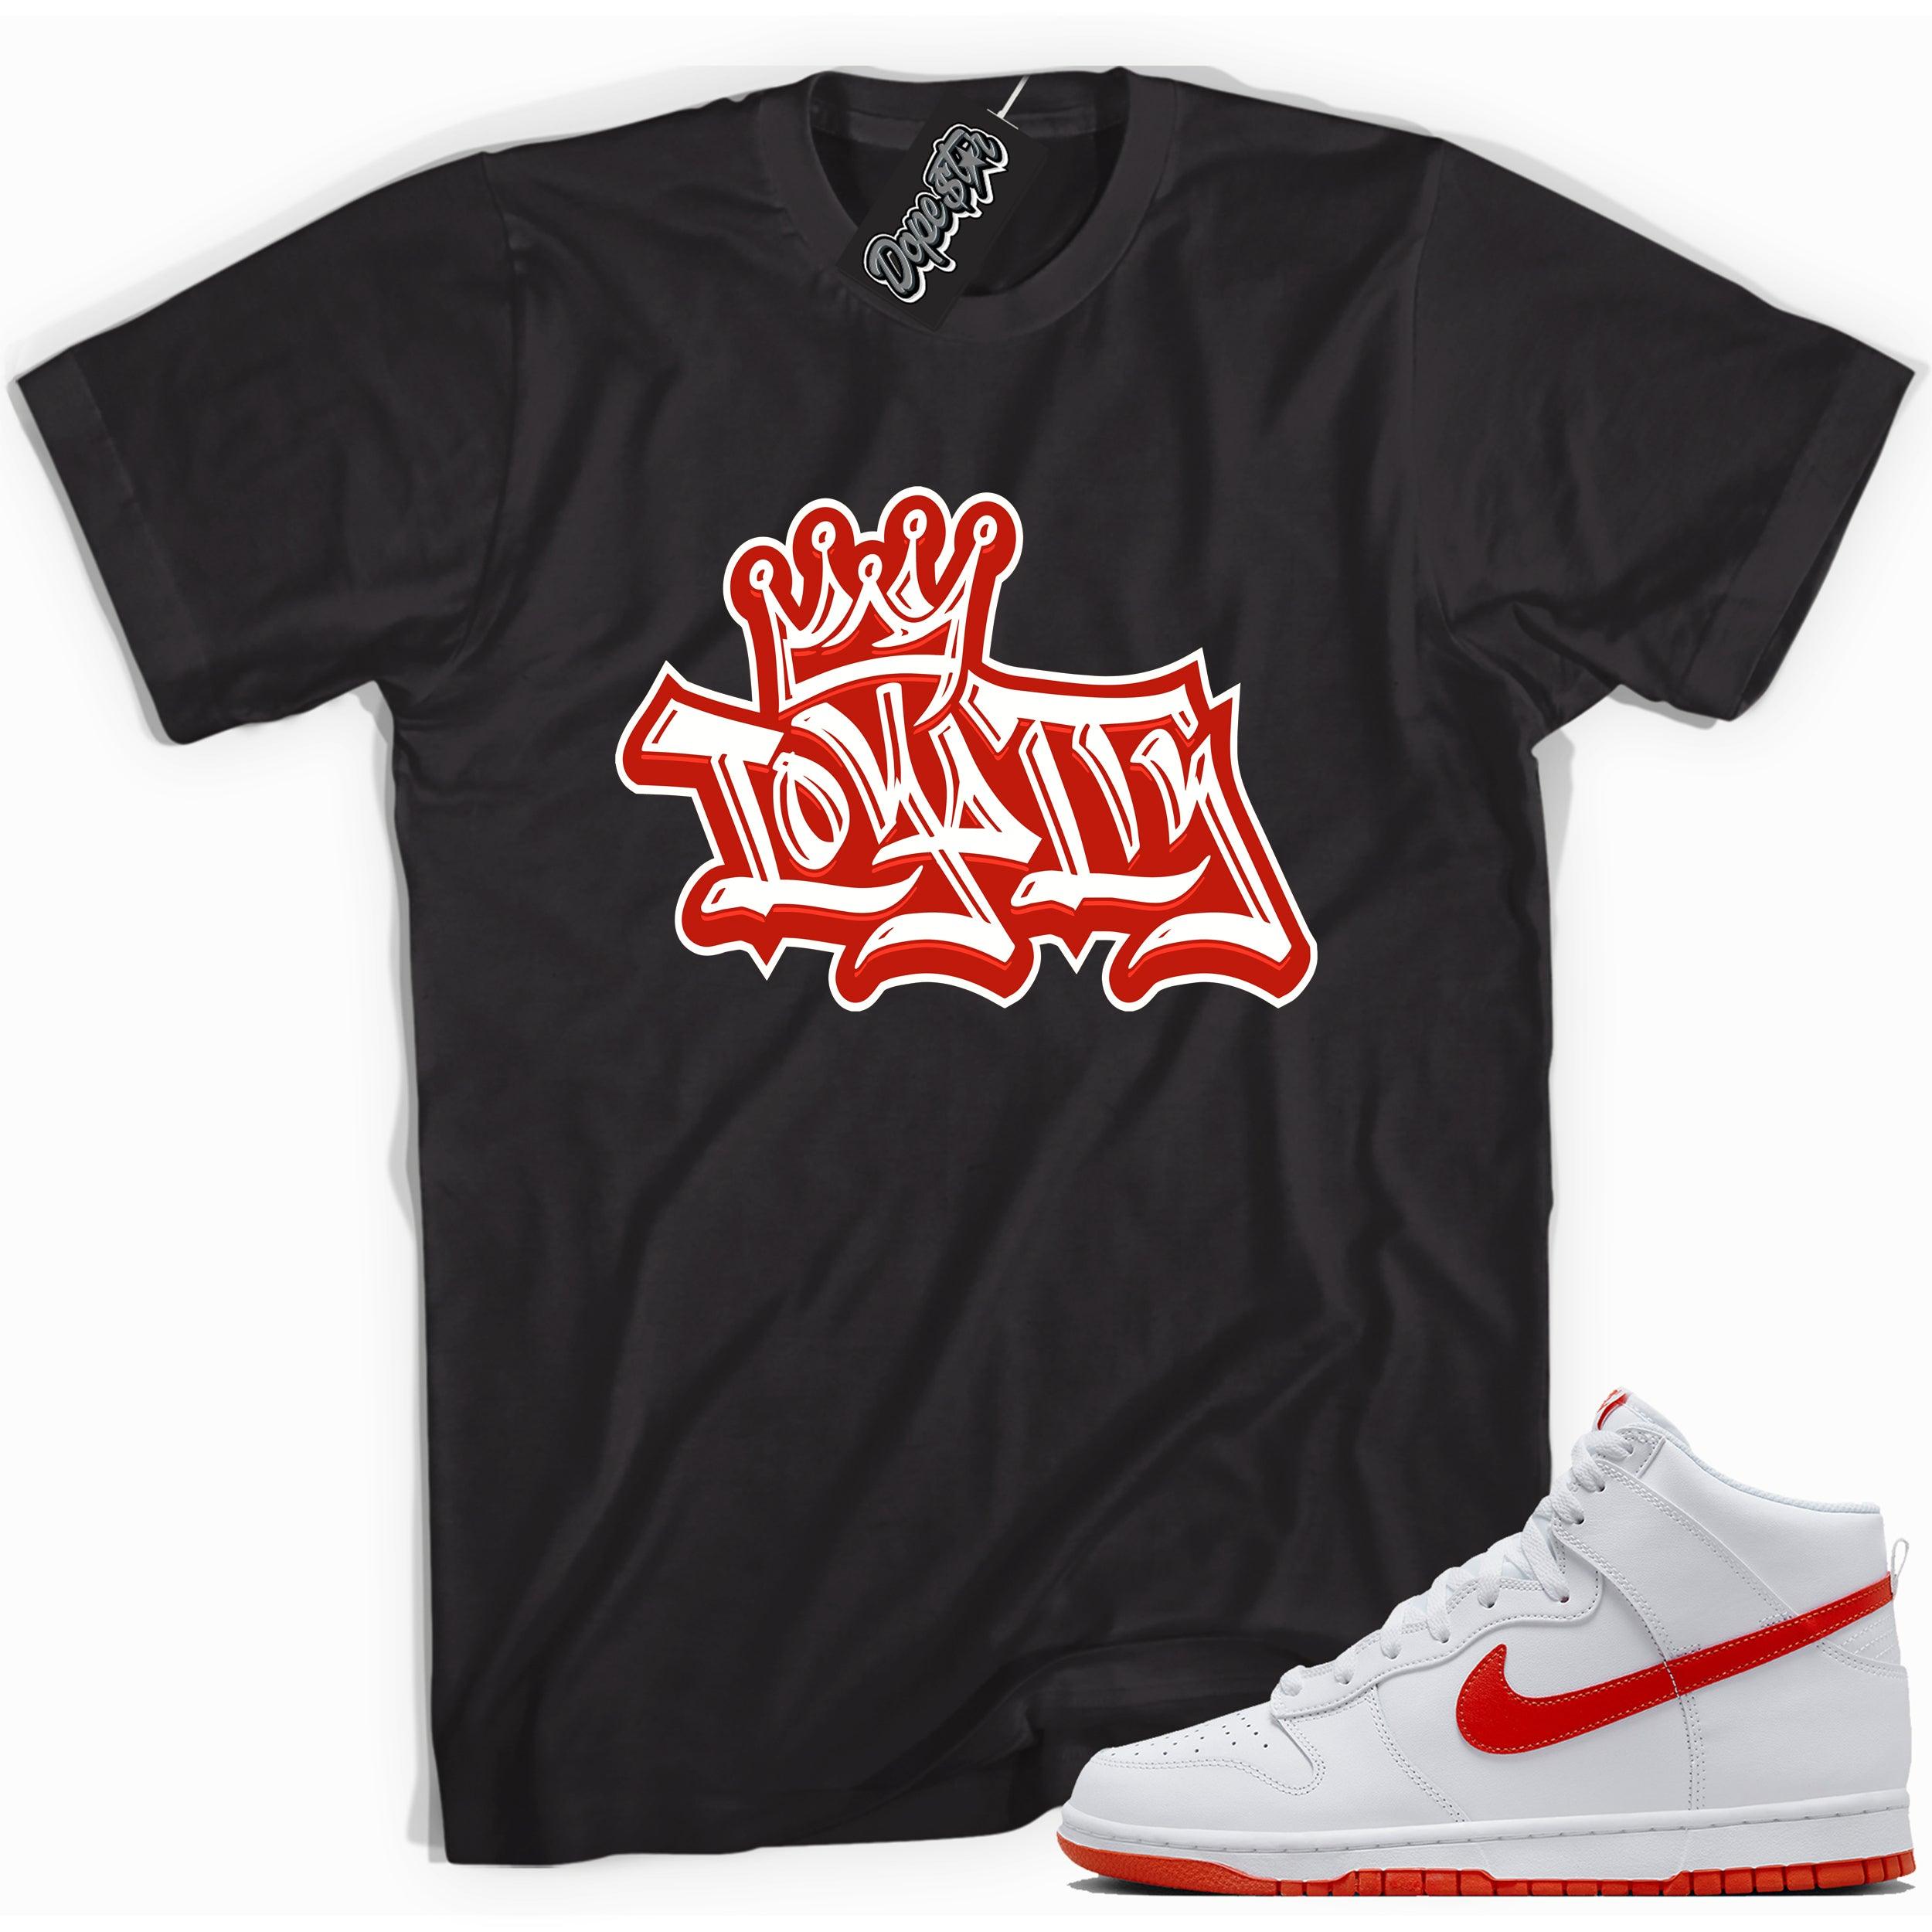 Cool black graphic tee with 'loyalty' print, that perfectly matches Nike Dunk High White Picante Red sneakers.